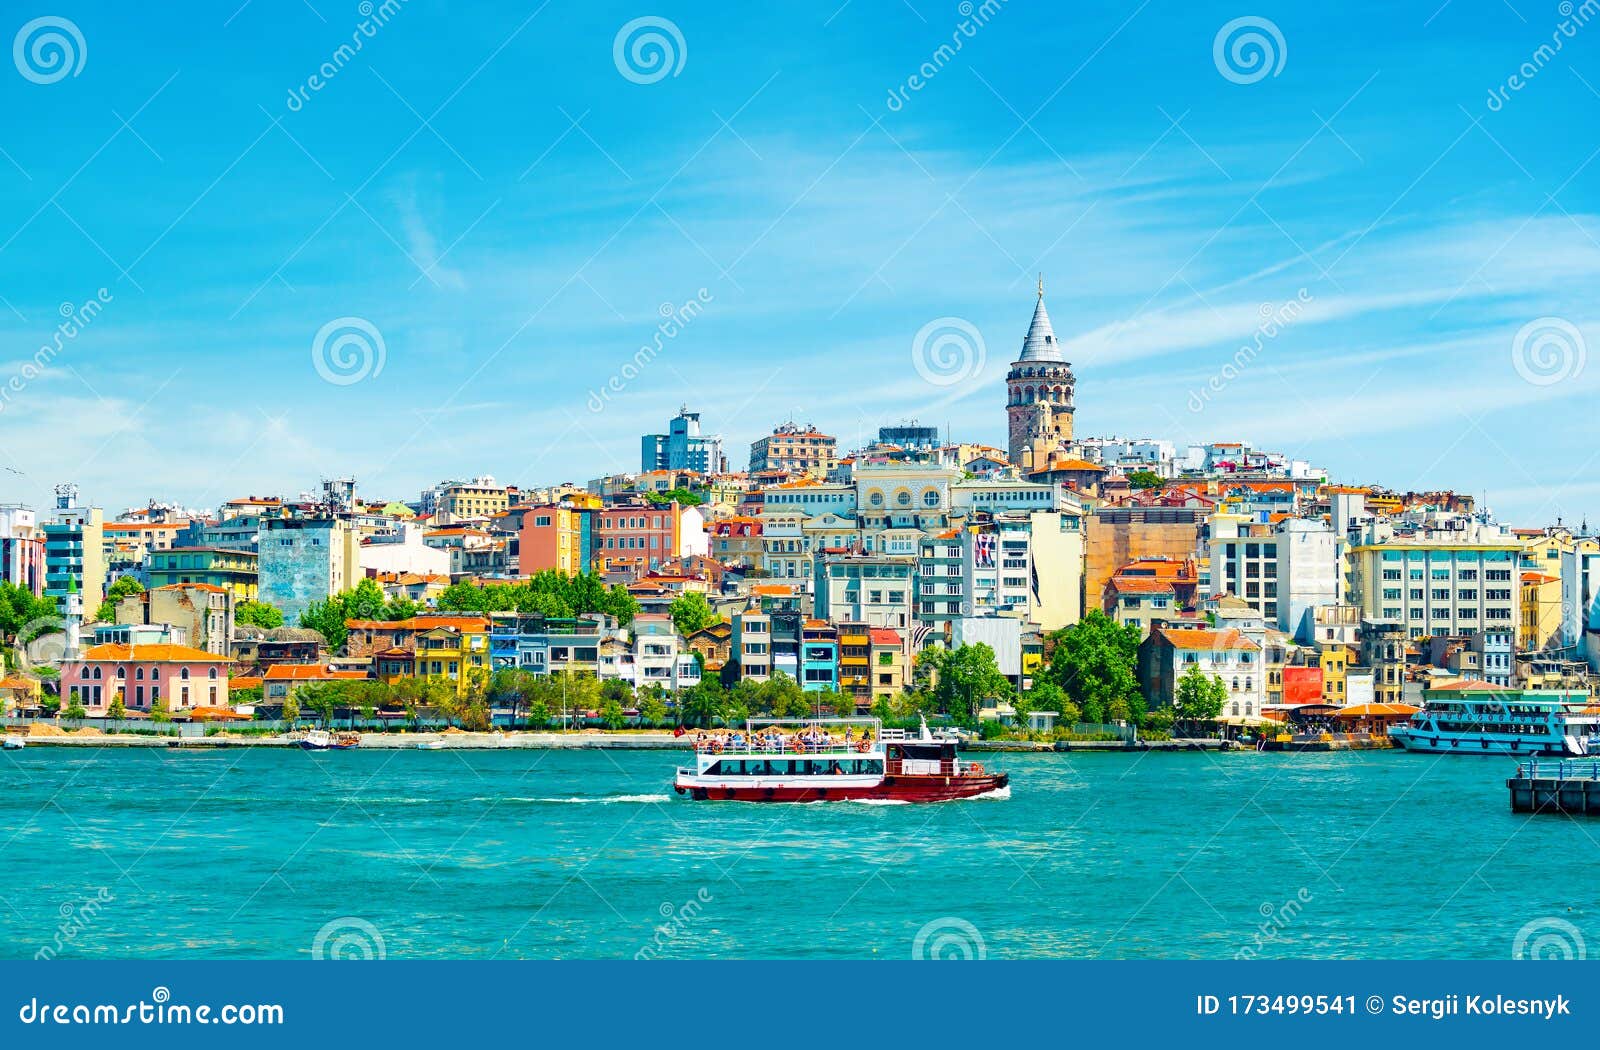 city and galata tower